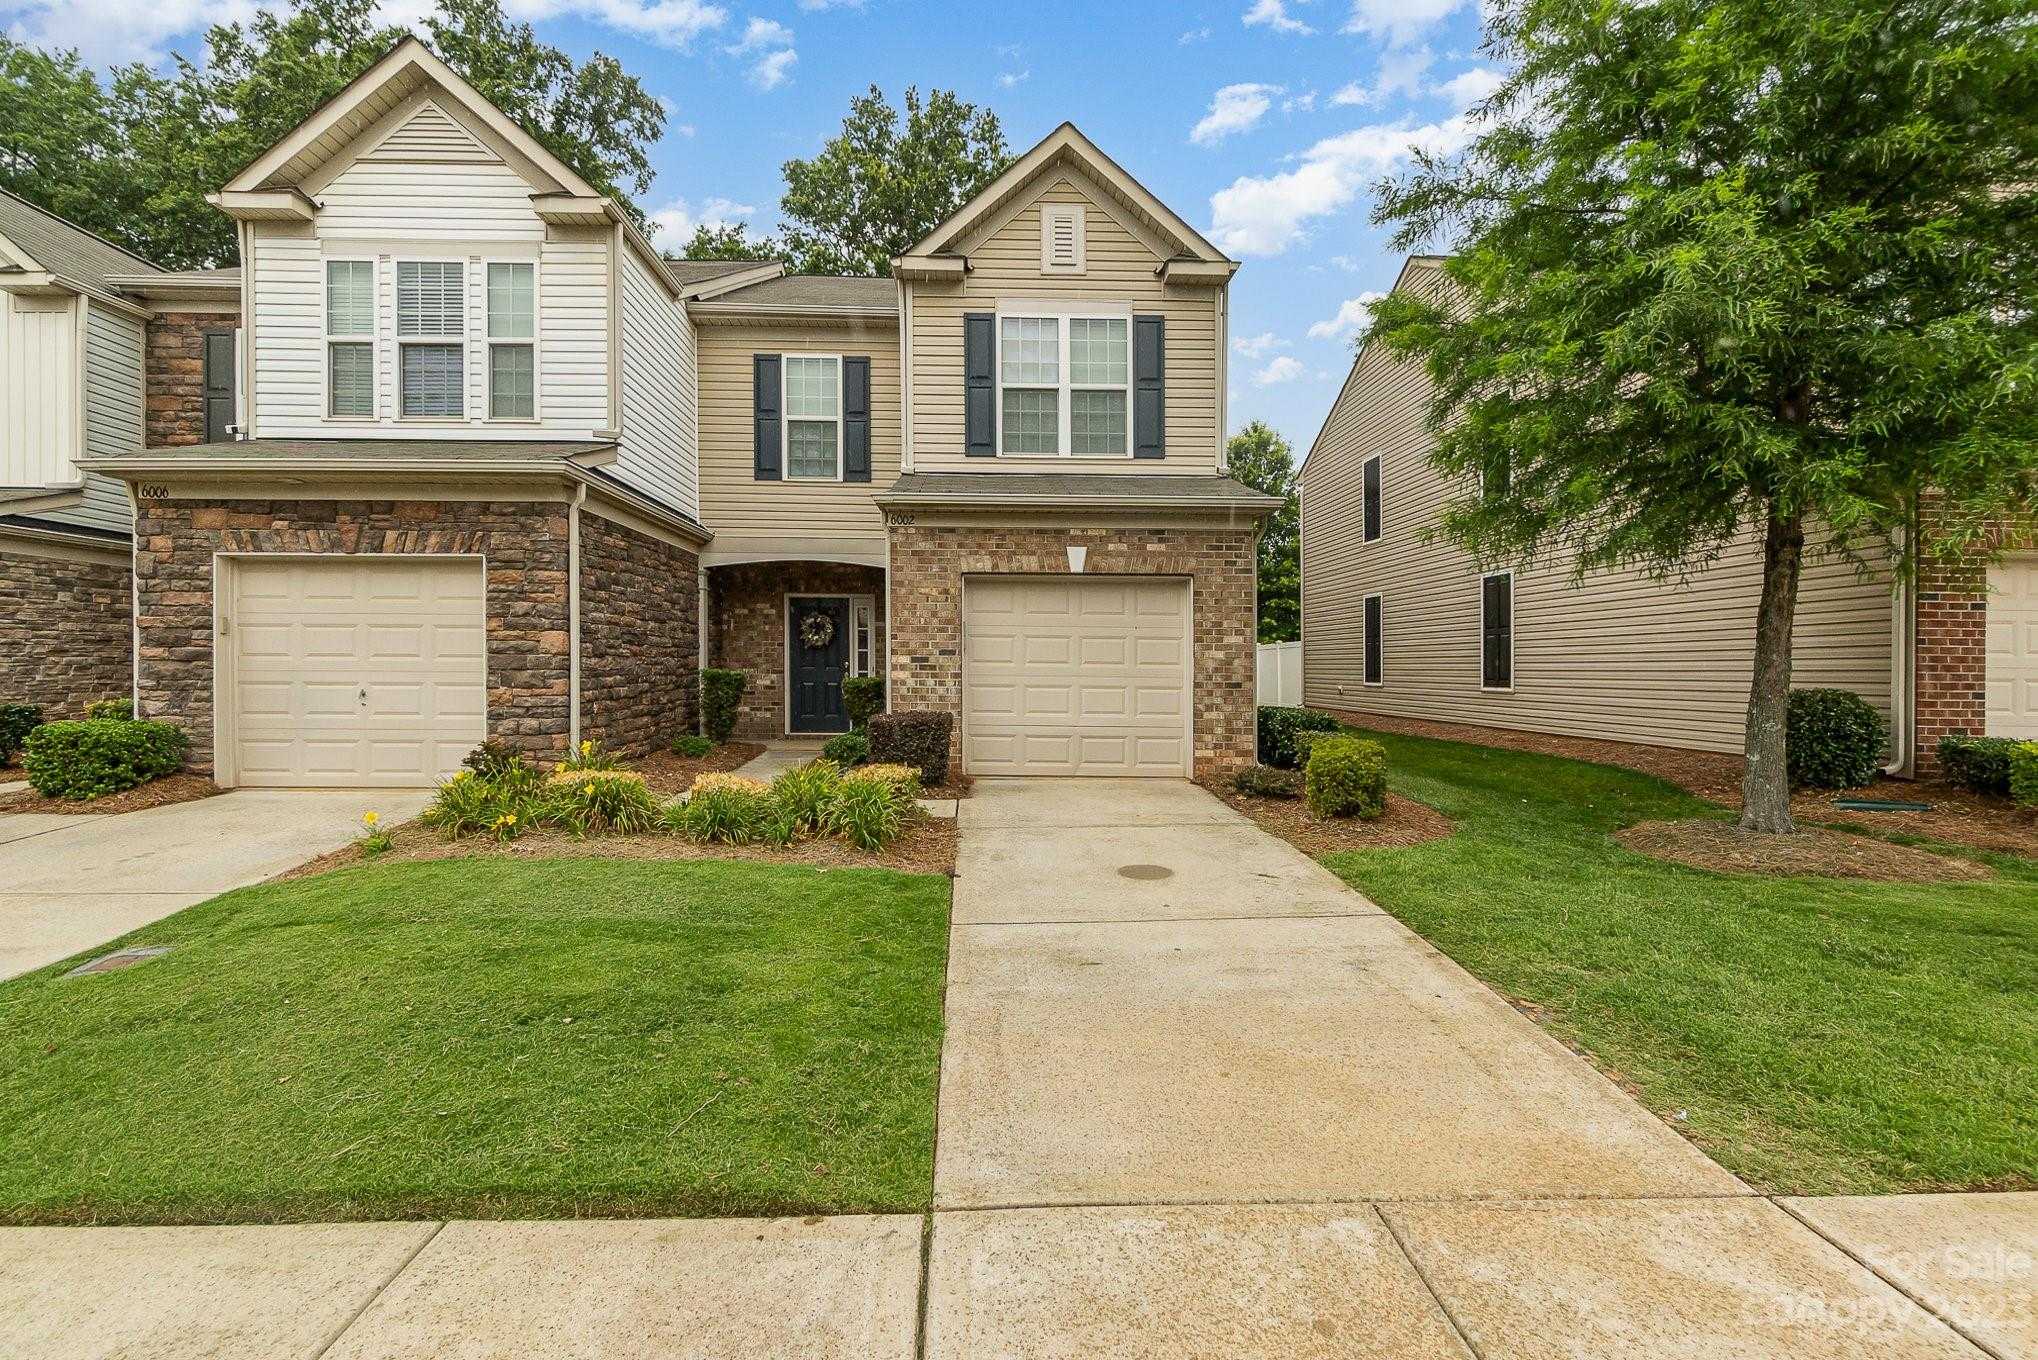 View Charlotte, NC 28210 townhome